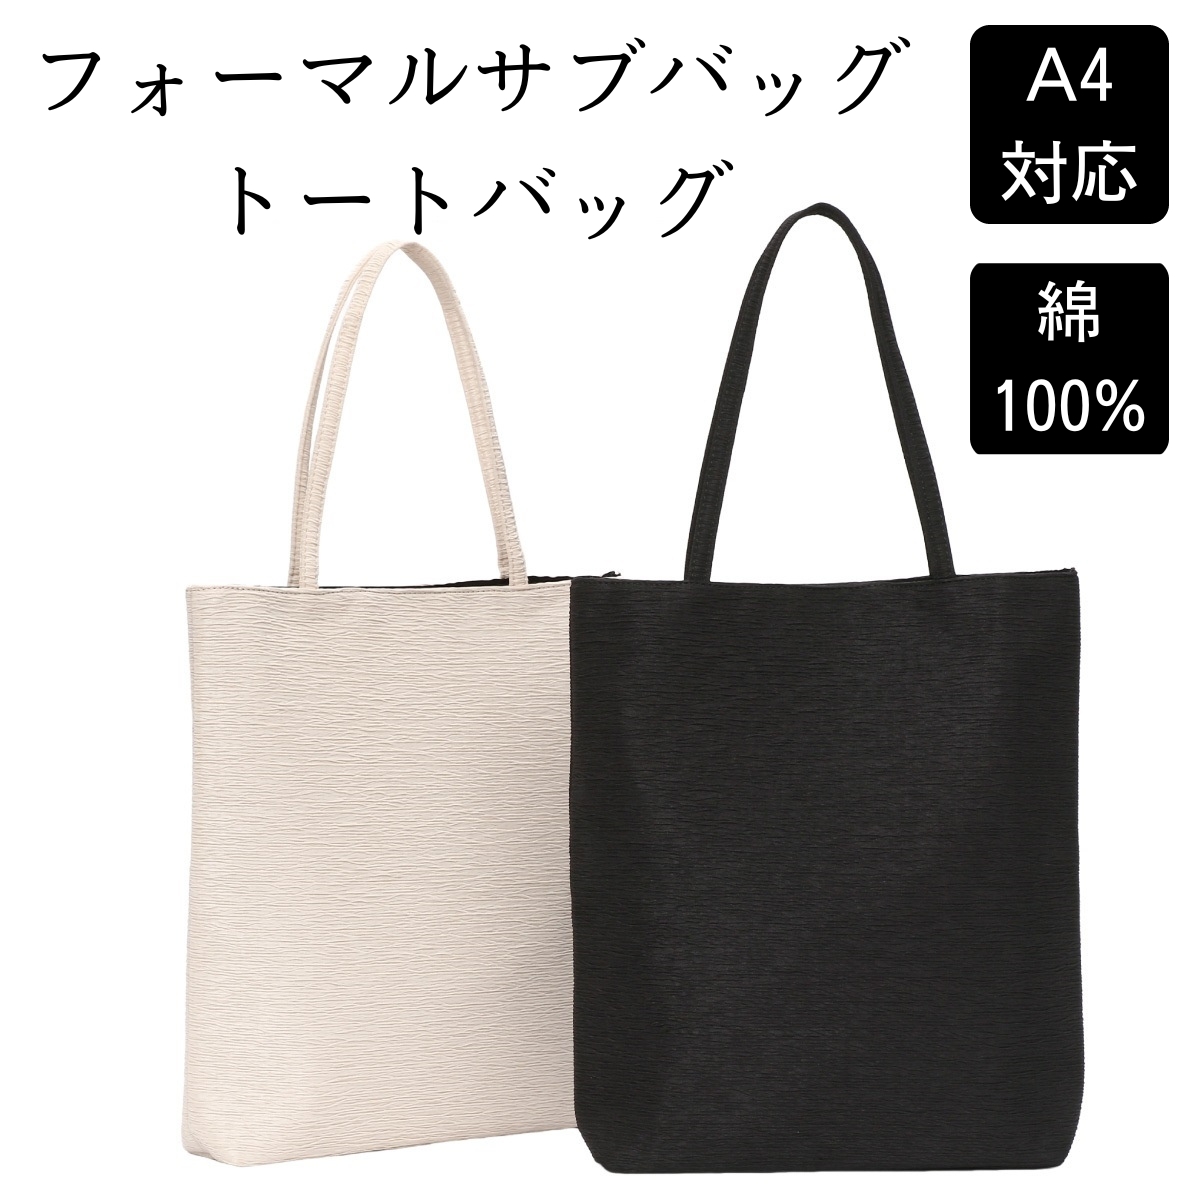  sub bag formal bag tote bag party bag A4 cotton lady's largish high capacity .. both for ceremonial occasions . examination go in . type graduation ceremony go in . type .. type 